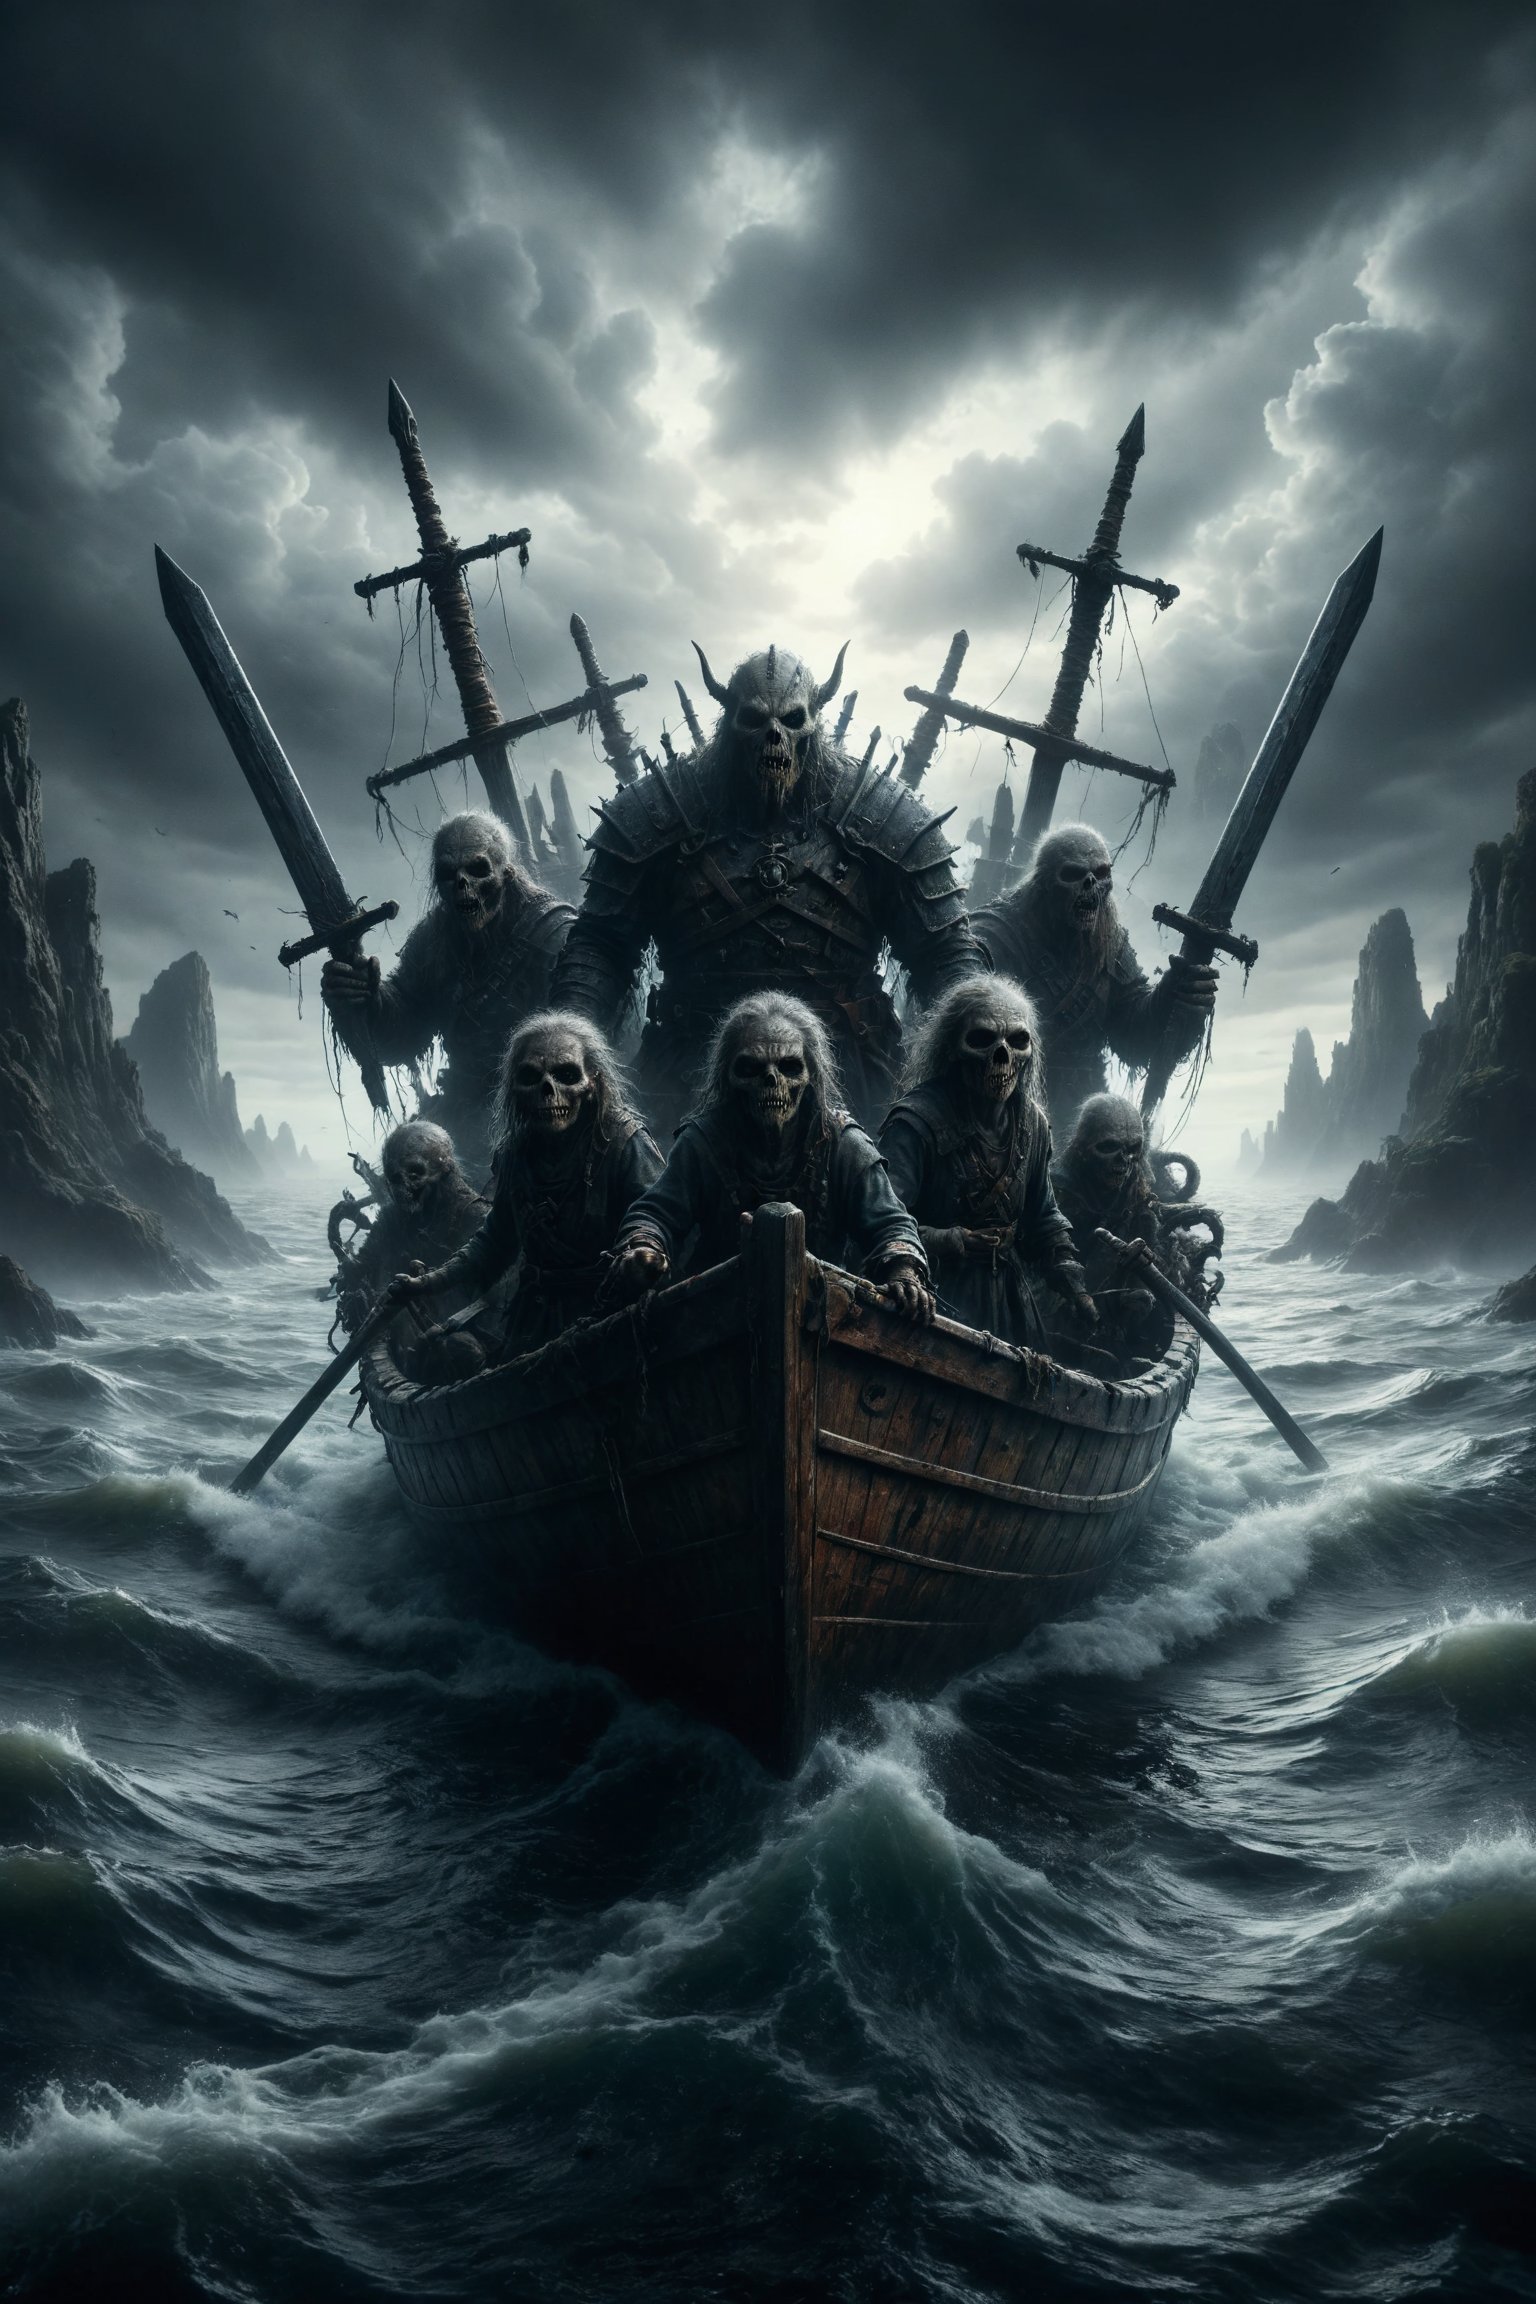 Generate a scene of a  HORROR MOSNTER  and its family sailing in a boat towards calm waters, leaving behind turbulent waters and six swords stuck in the bottom, symbolizing transition, journey, and overcoming.